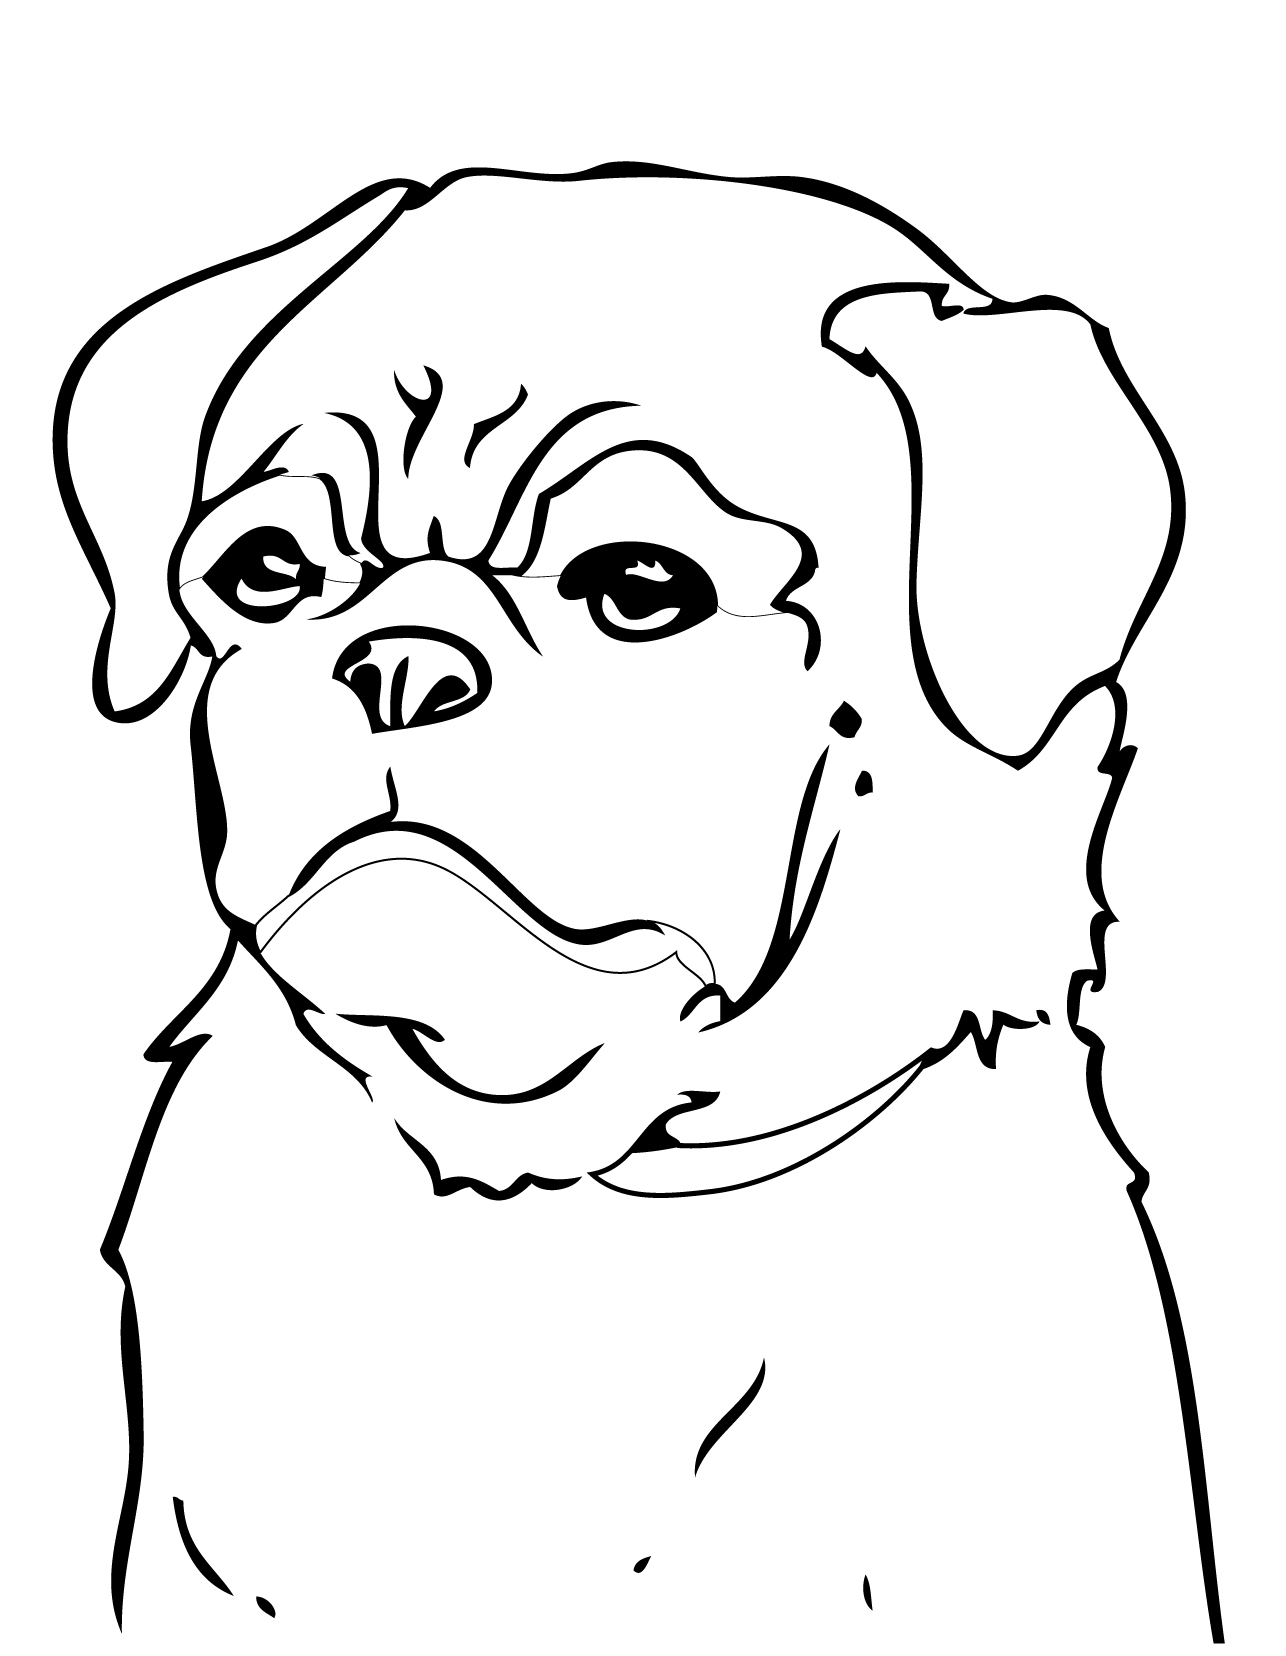 Pug coloring pages to download and print for free